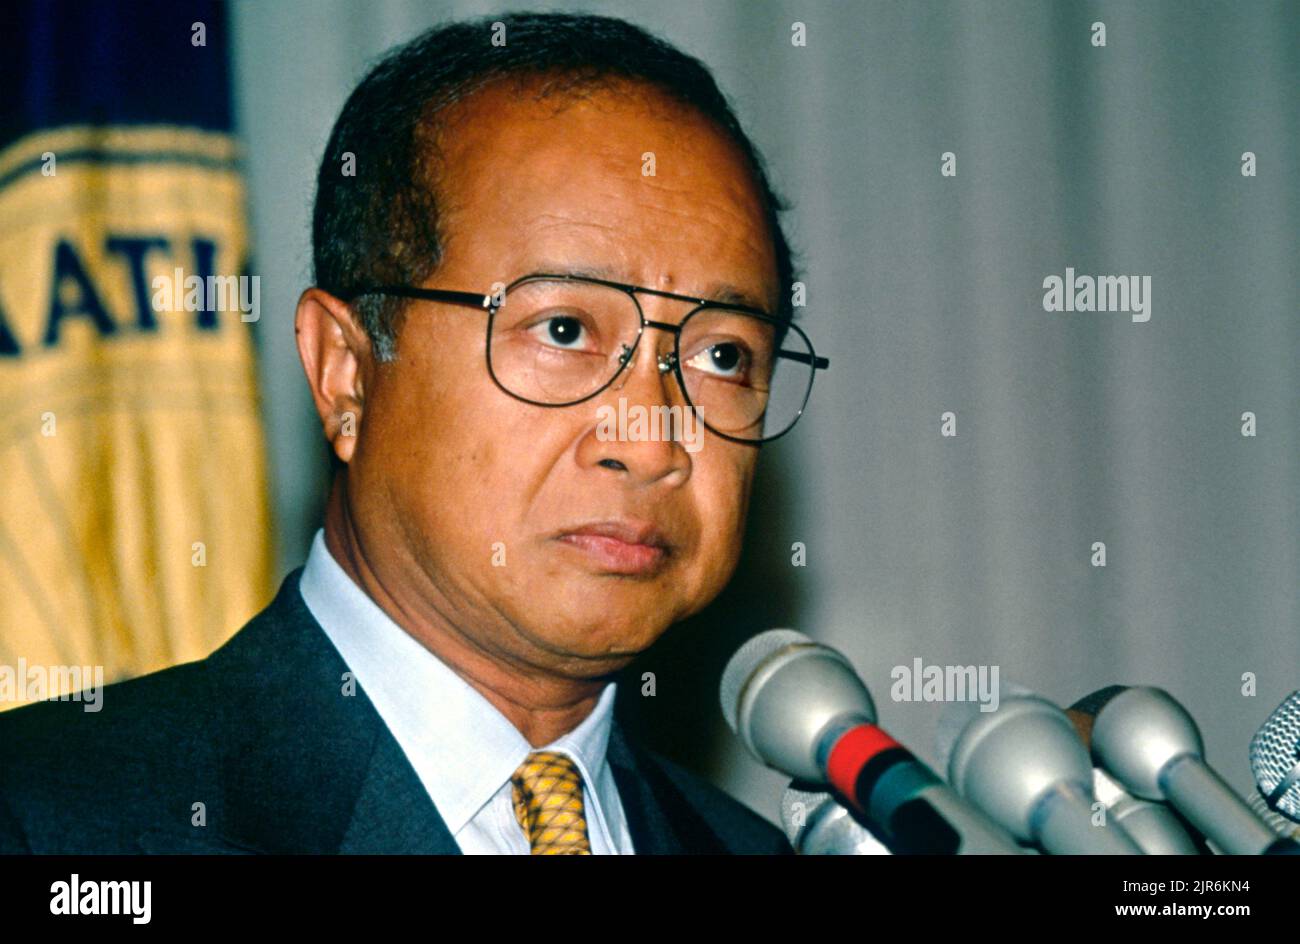 Exiled Cambodian leader Prince Norodom Ranariddh, listens to a question during a news conference at the National Press Club, July 10, 1997, in Washington, D.C. Ranariddh, was ousted in a power struggle by Khmer Rouge leader Hun Sen, and is seeking assistance in restoring the power-sharing arrangement in Phnom Penh. Stock Photo